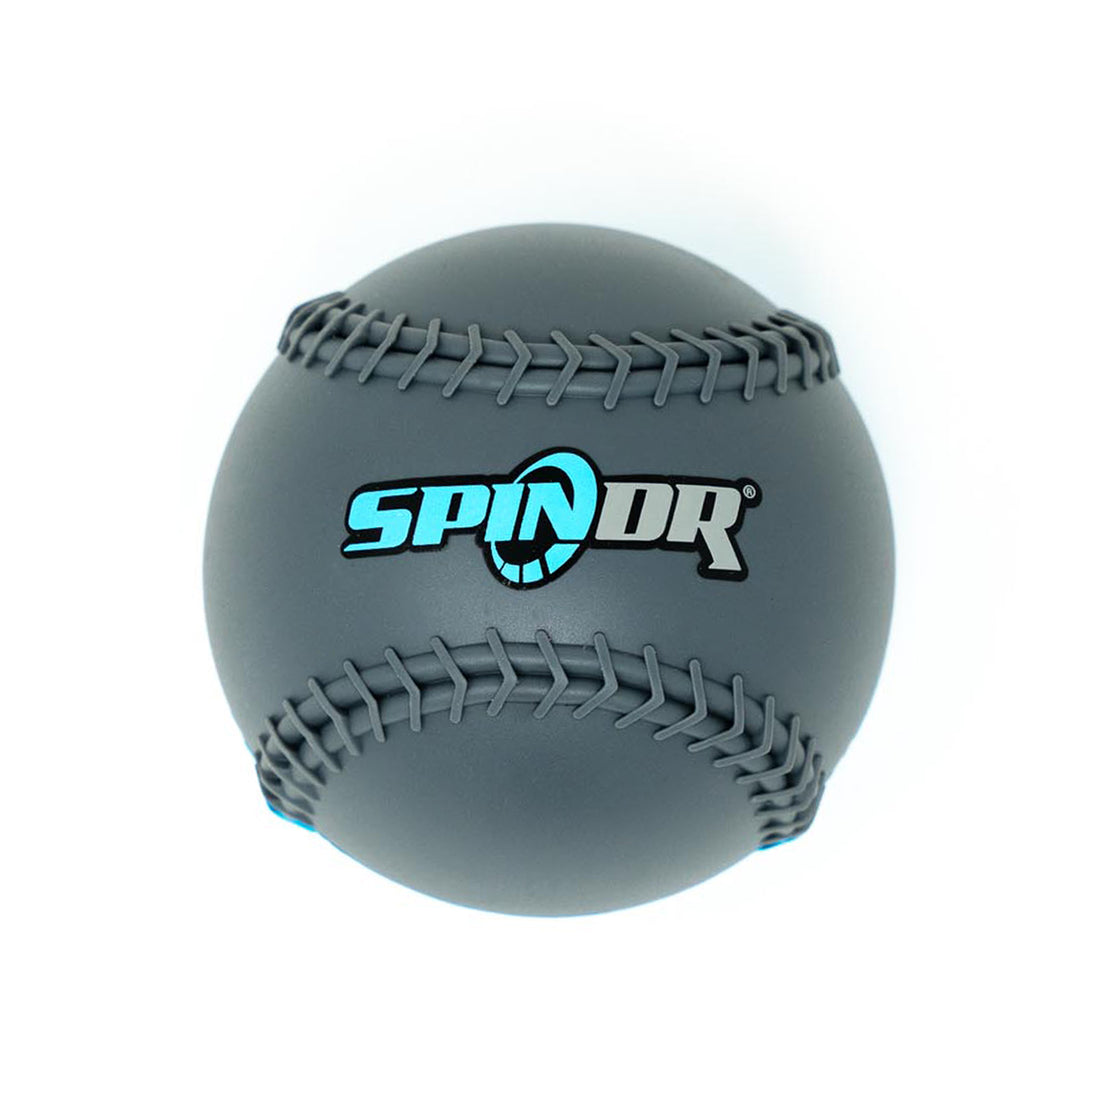 The SpinDr